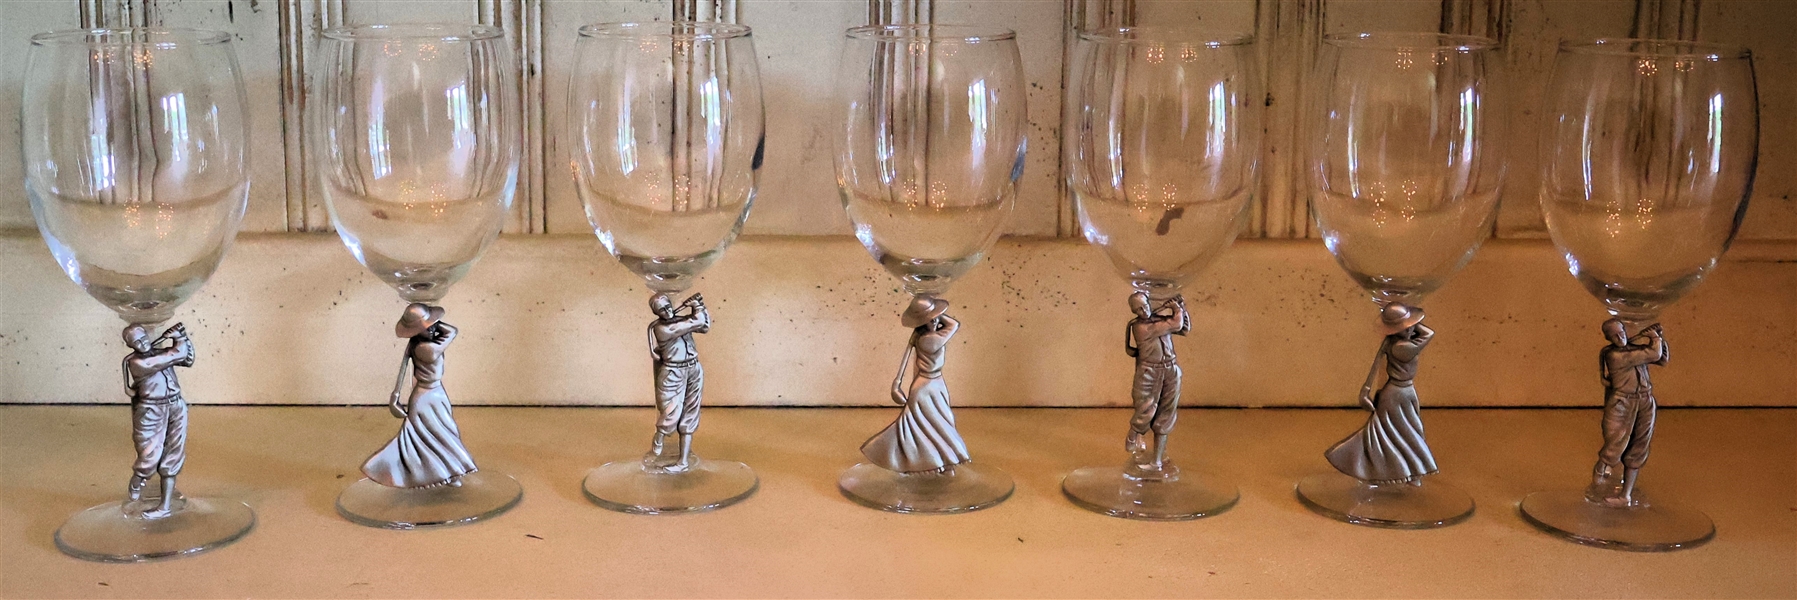 7 - Wine Glasses with Pewter Golfers on Stems- Signed Fort - Each Measures 7 1/2" Tall 